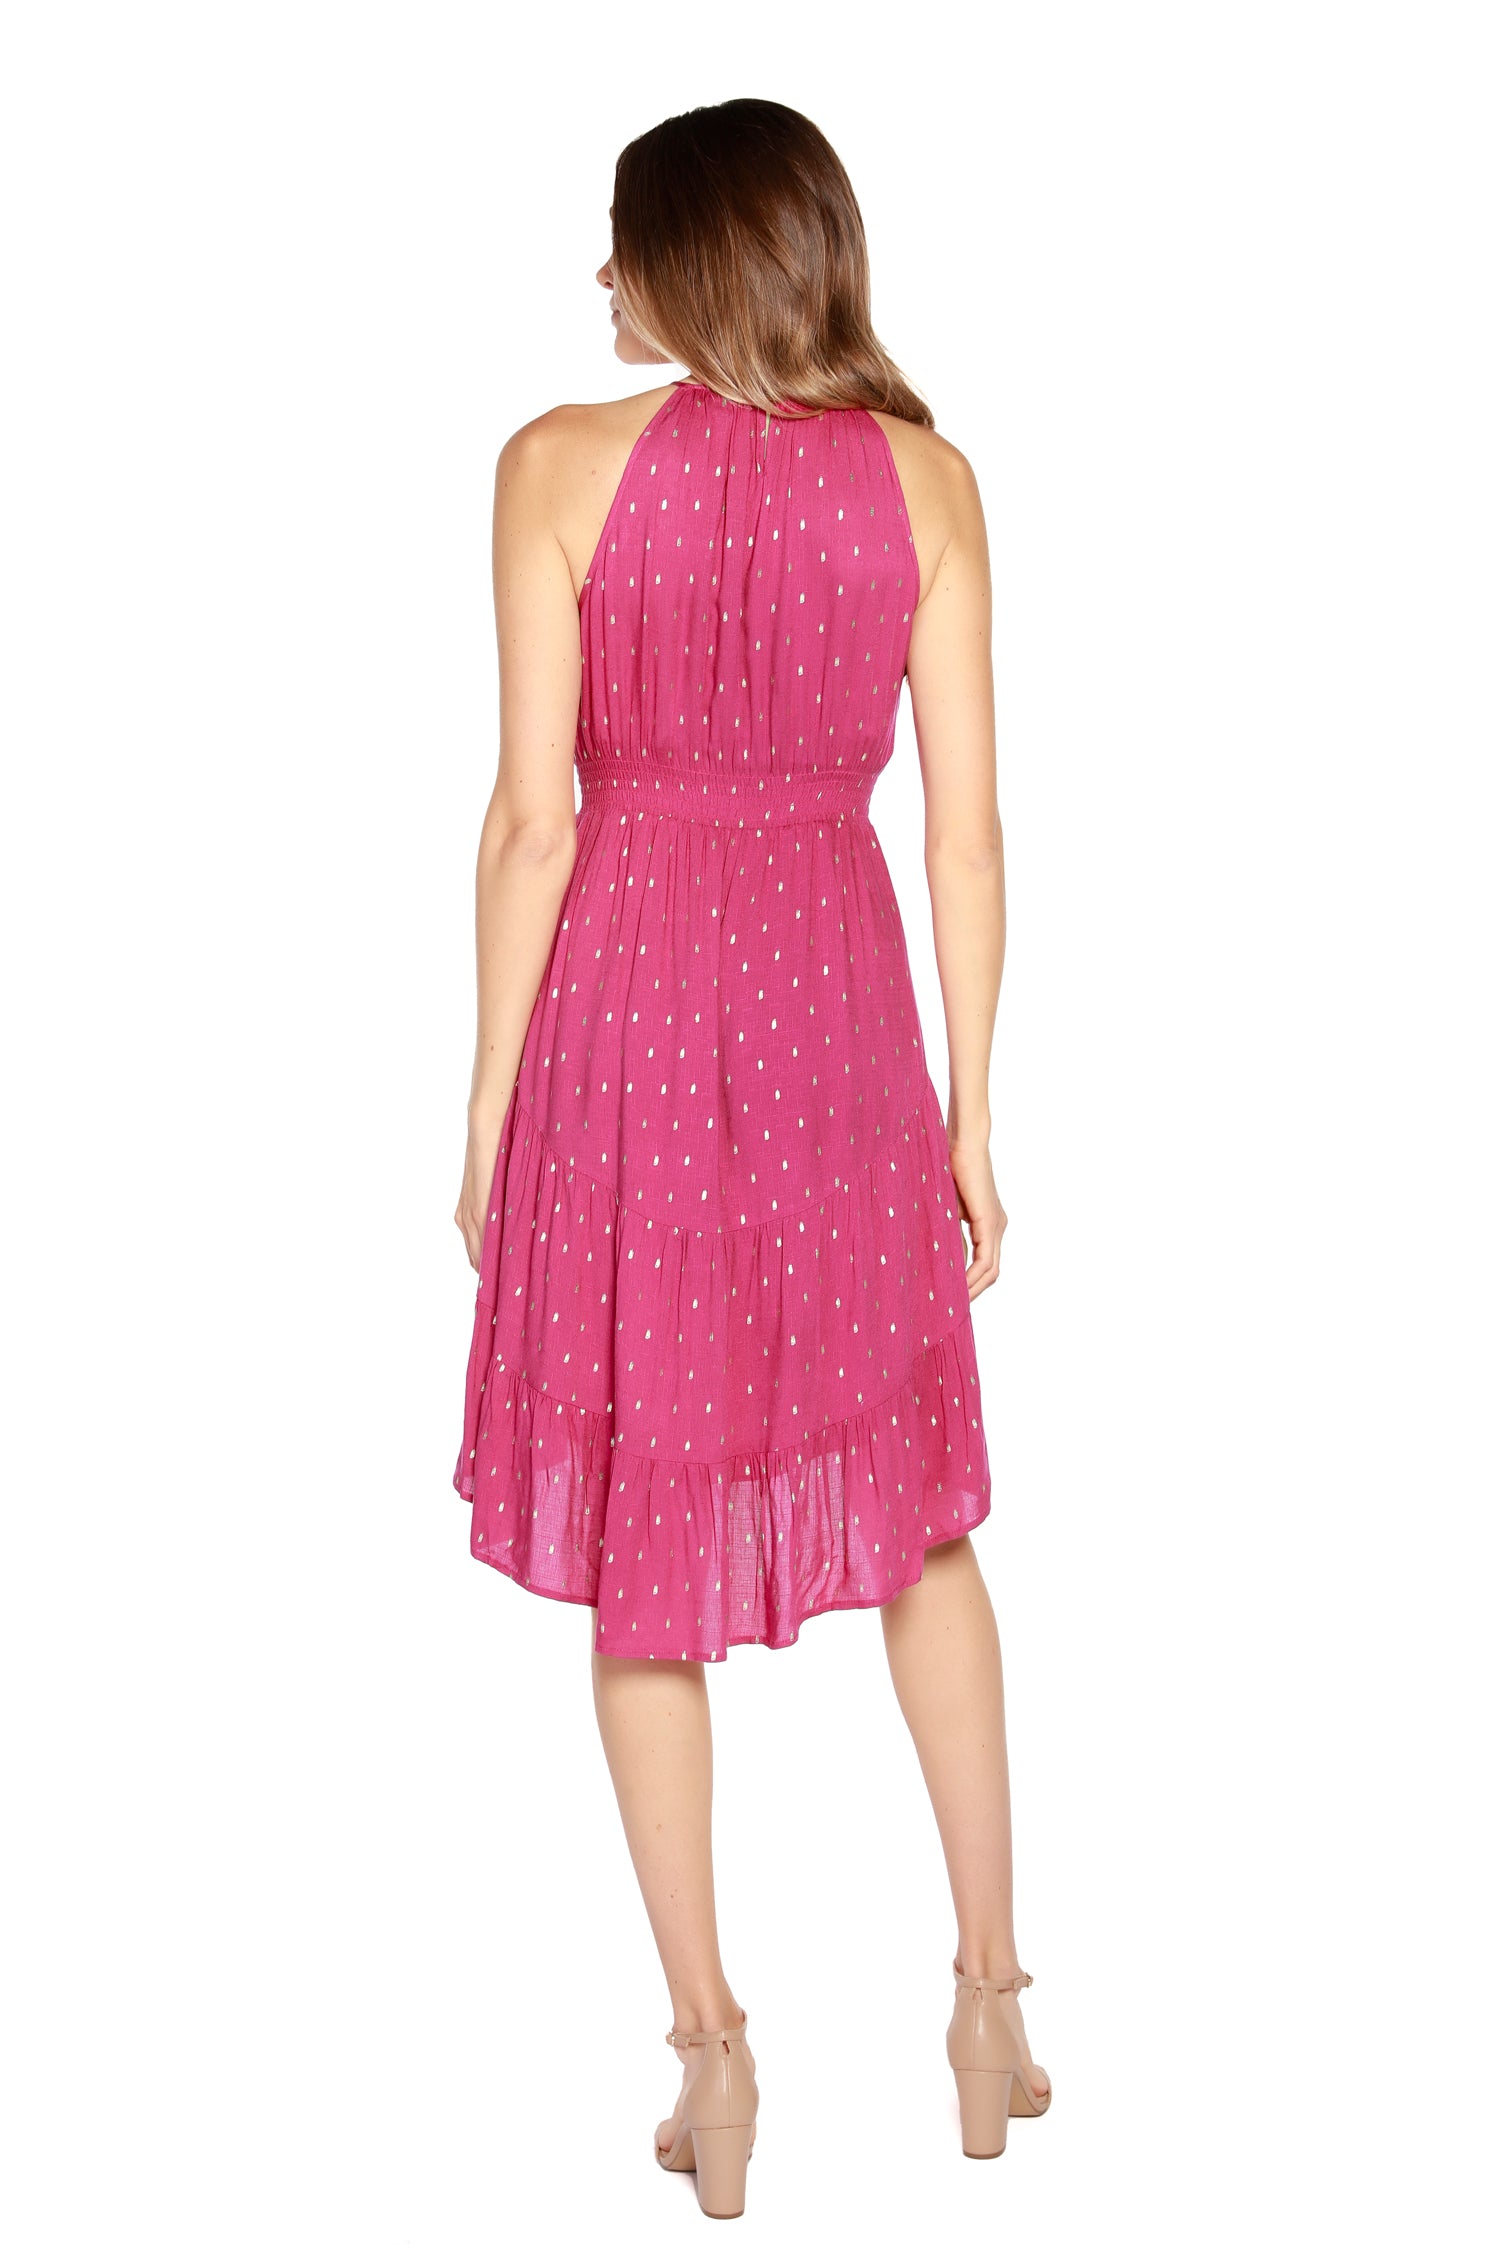 Women’s Sleeveless Dress with Tiered Skirt and High-Low Hem